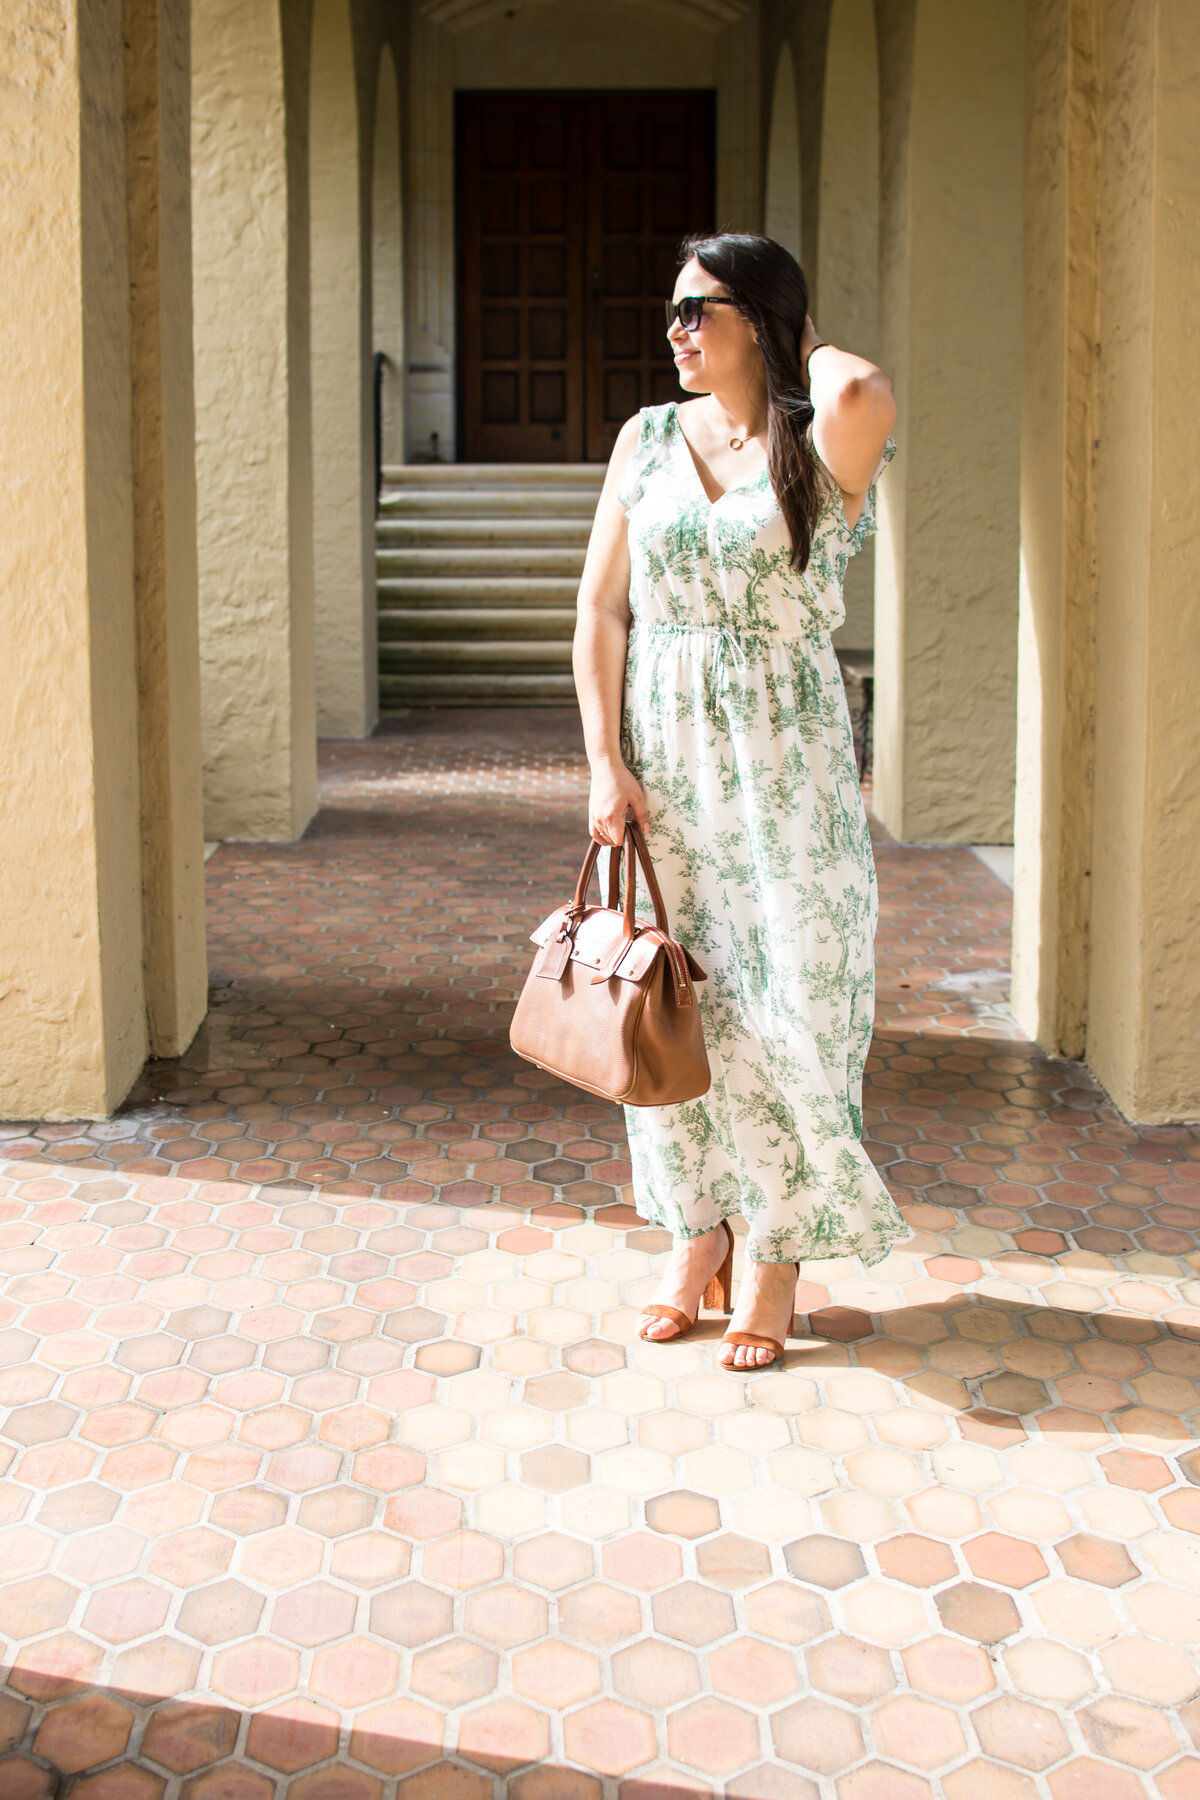 Woman in green and white dress touches her hair while stopped in the sunlight under a covered walkway